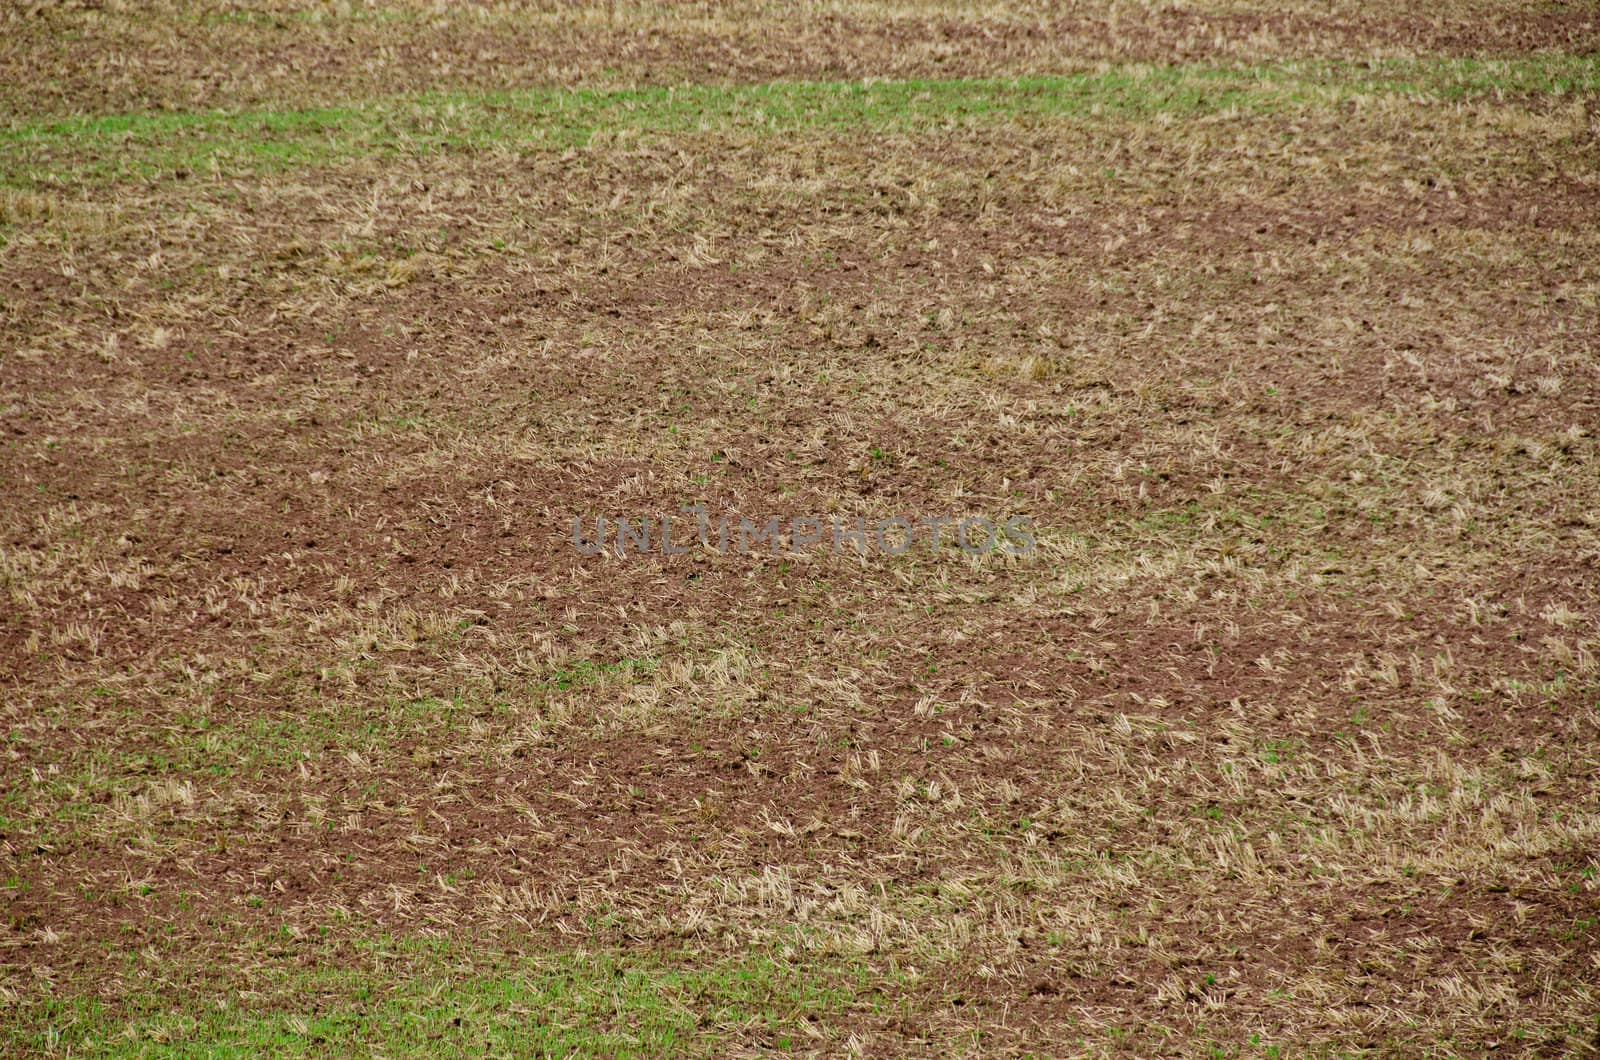 harvested and ploughed field background pattern with soil, straw and grass